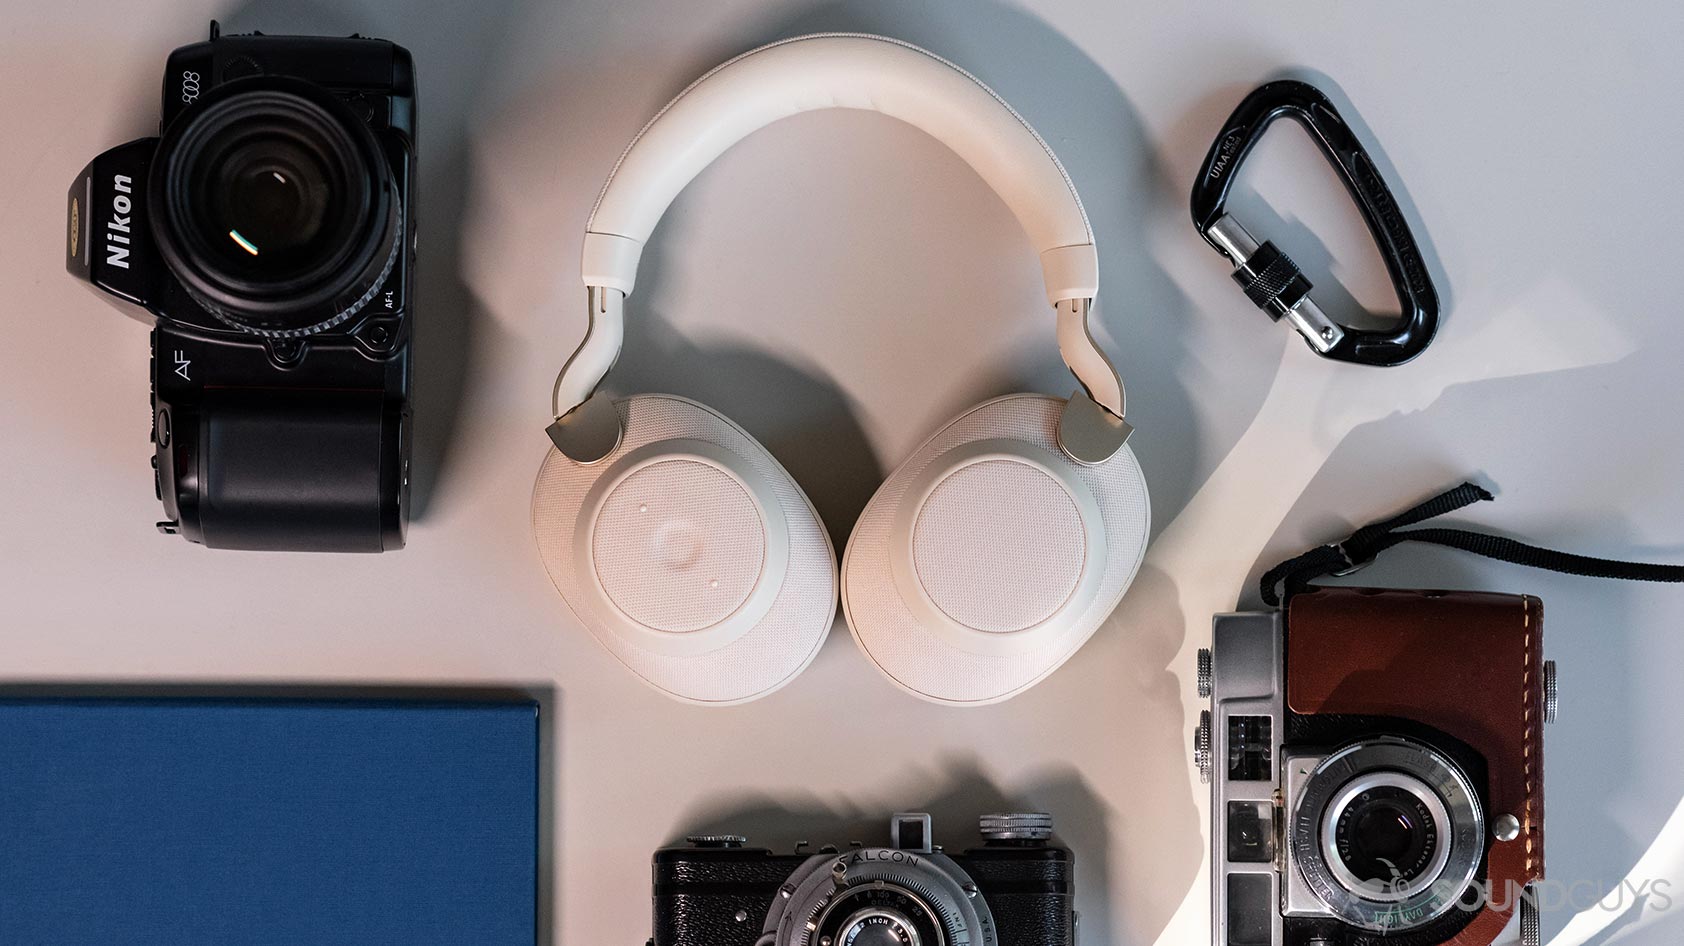 AKG N700NC - Jabra Elite 85h: Aerial image of the headphones folded flat on a table and surrounded by vintage cameras, a blue notebook, and a black carabiner.